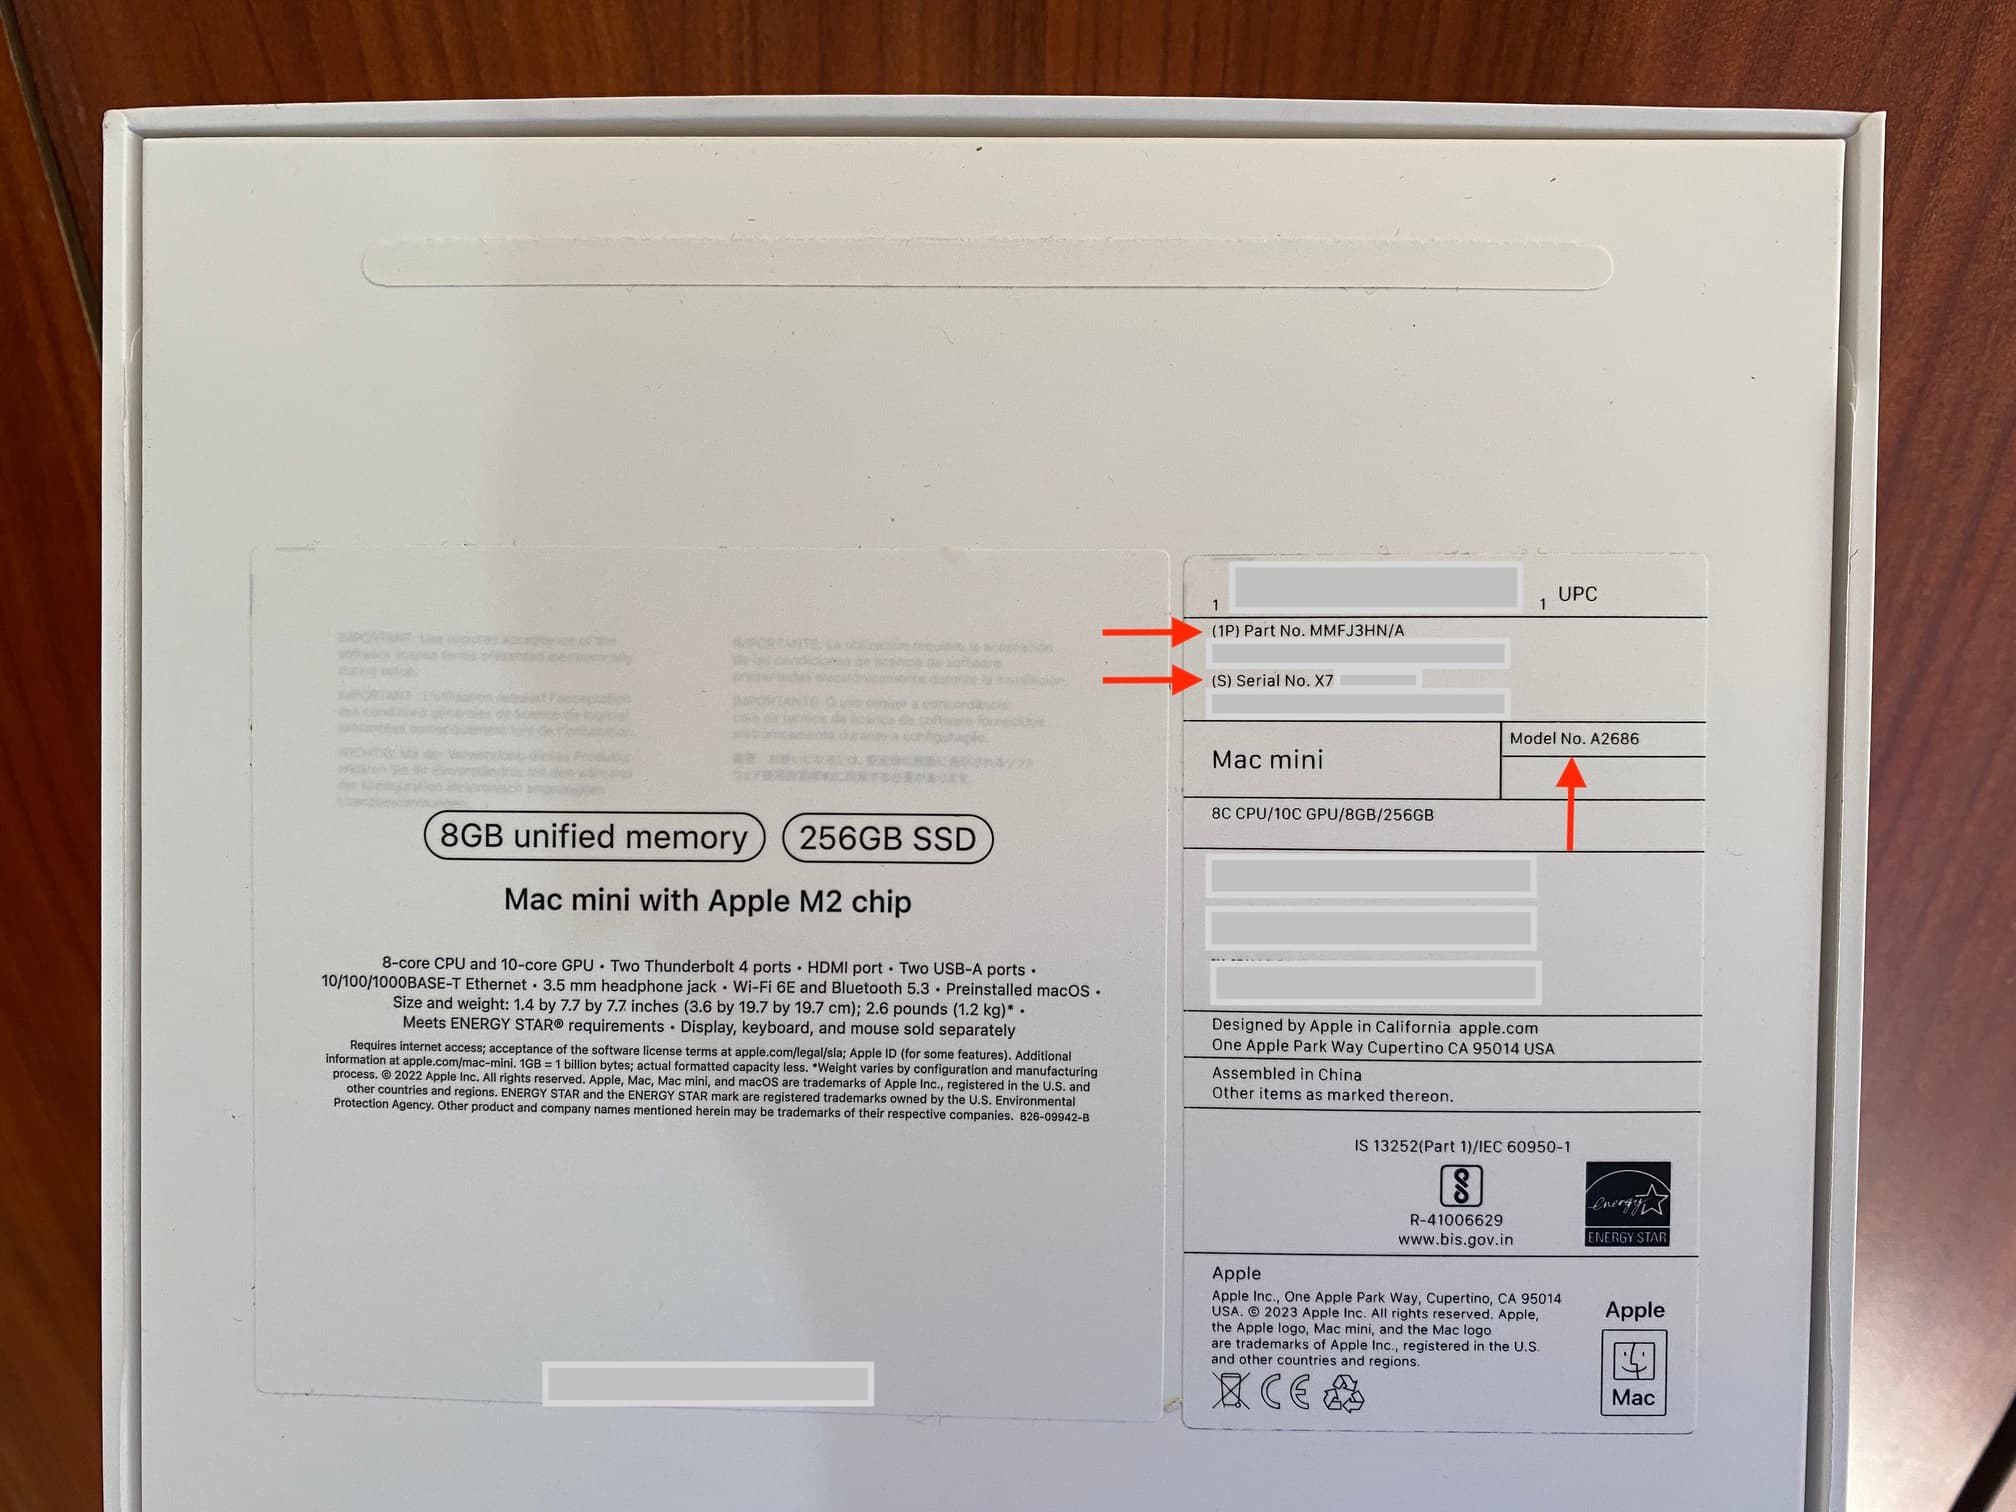 Part number, serial number, and model number visible on Mac's original box